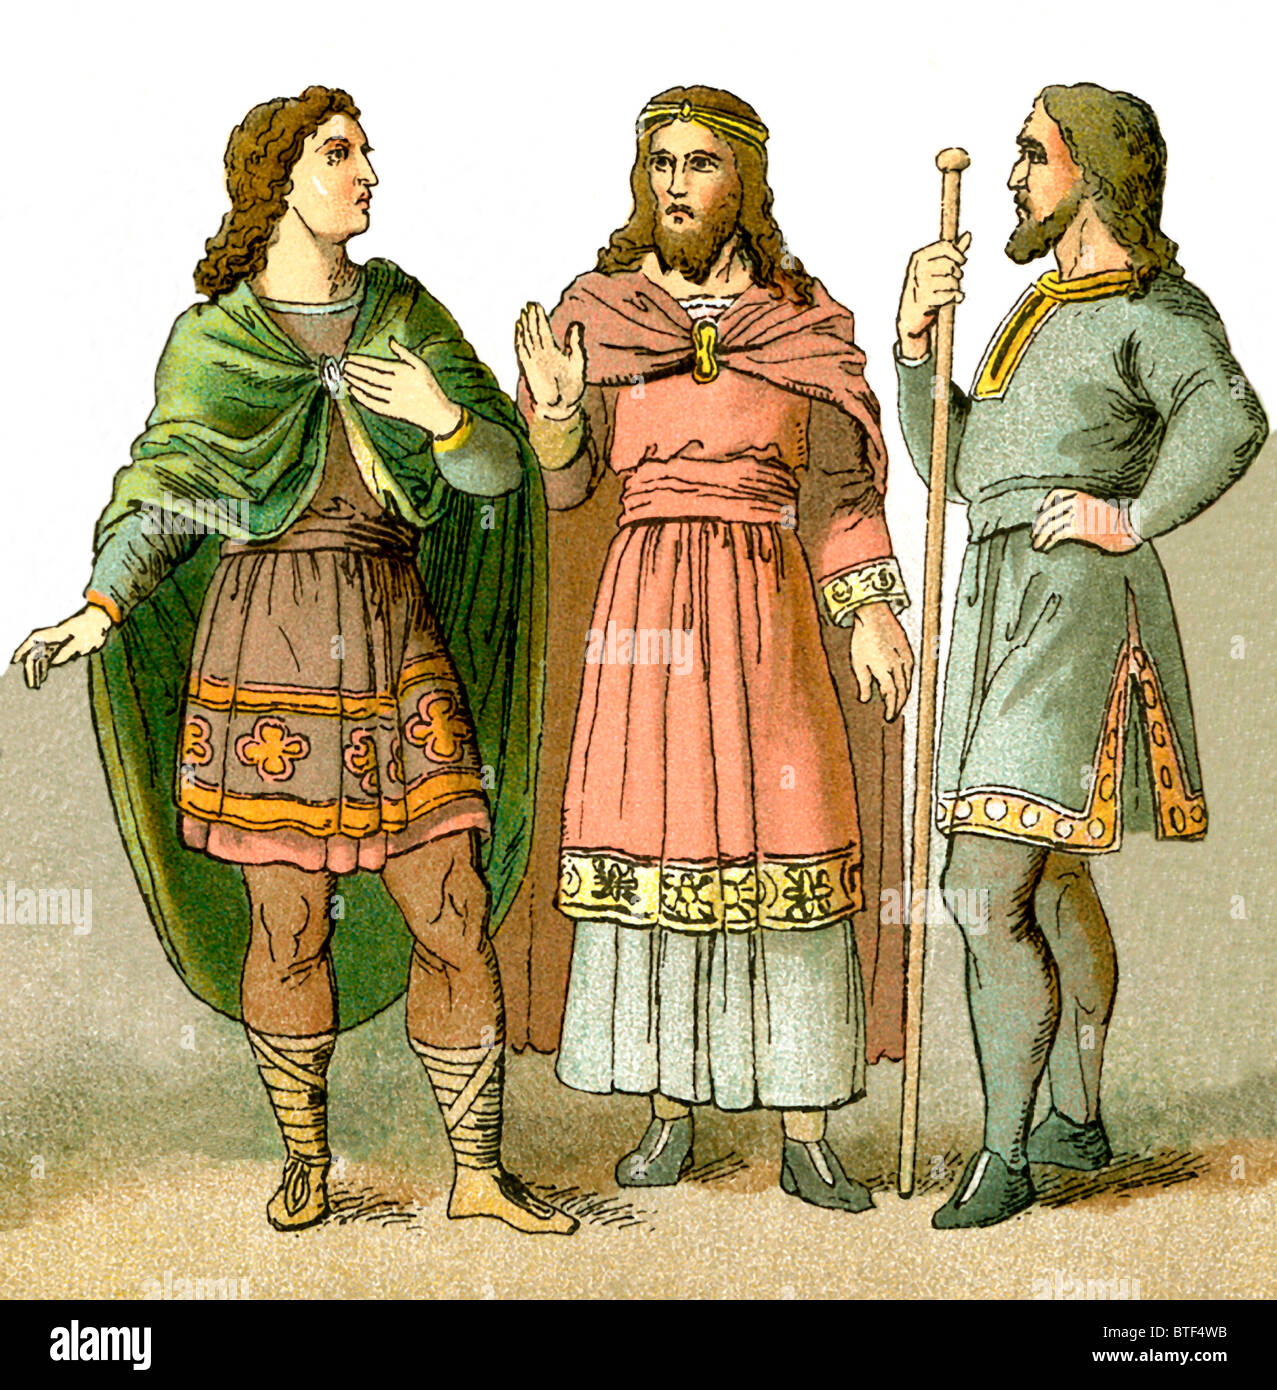 these-anglo-saxon-germanic-speaking-people-who-settled-in-england-BTF4WB.jpg